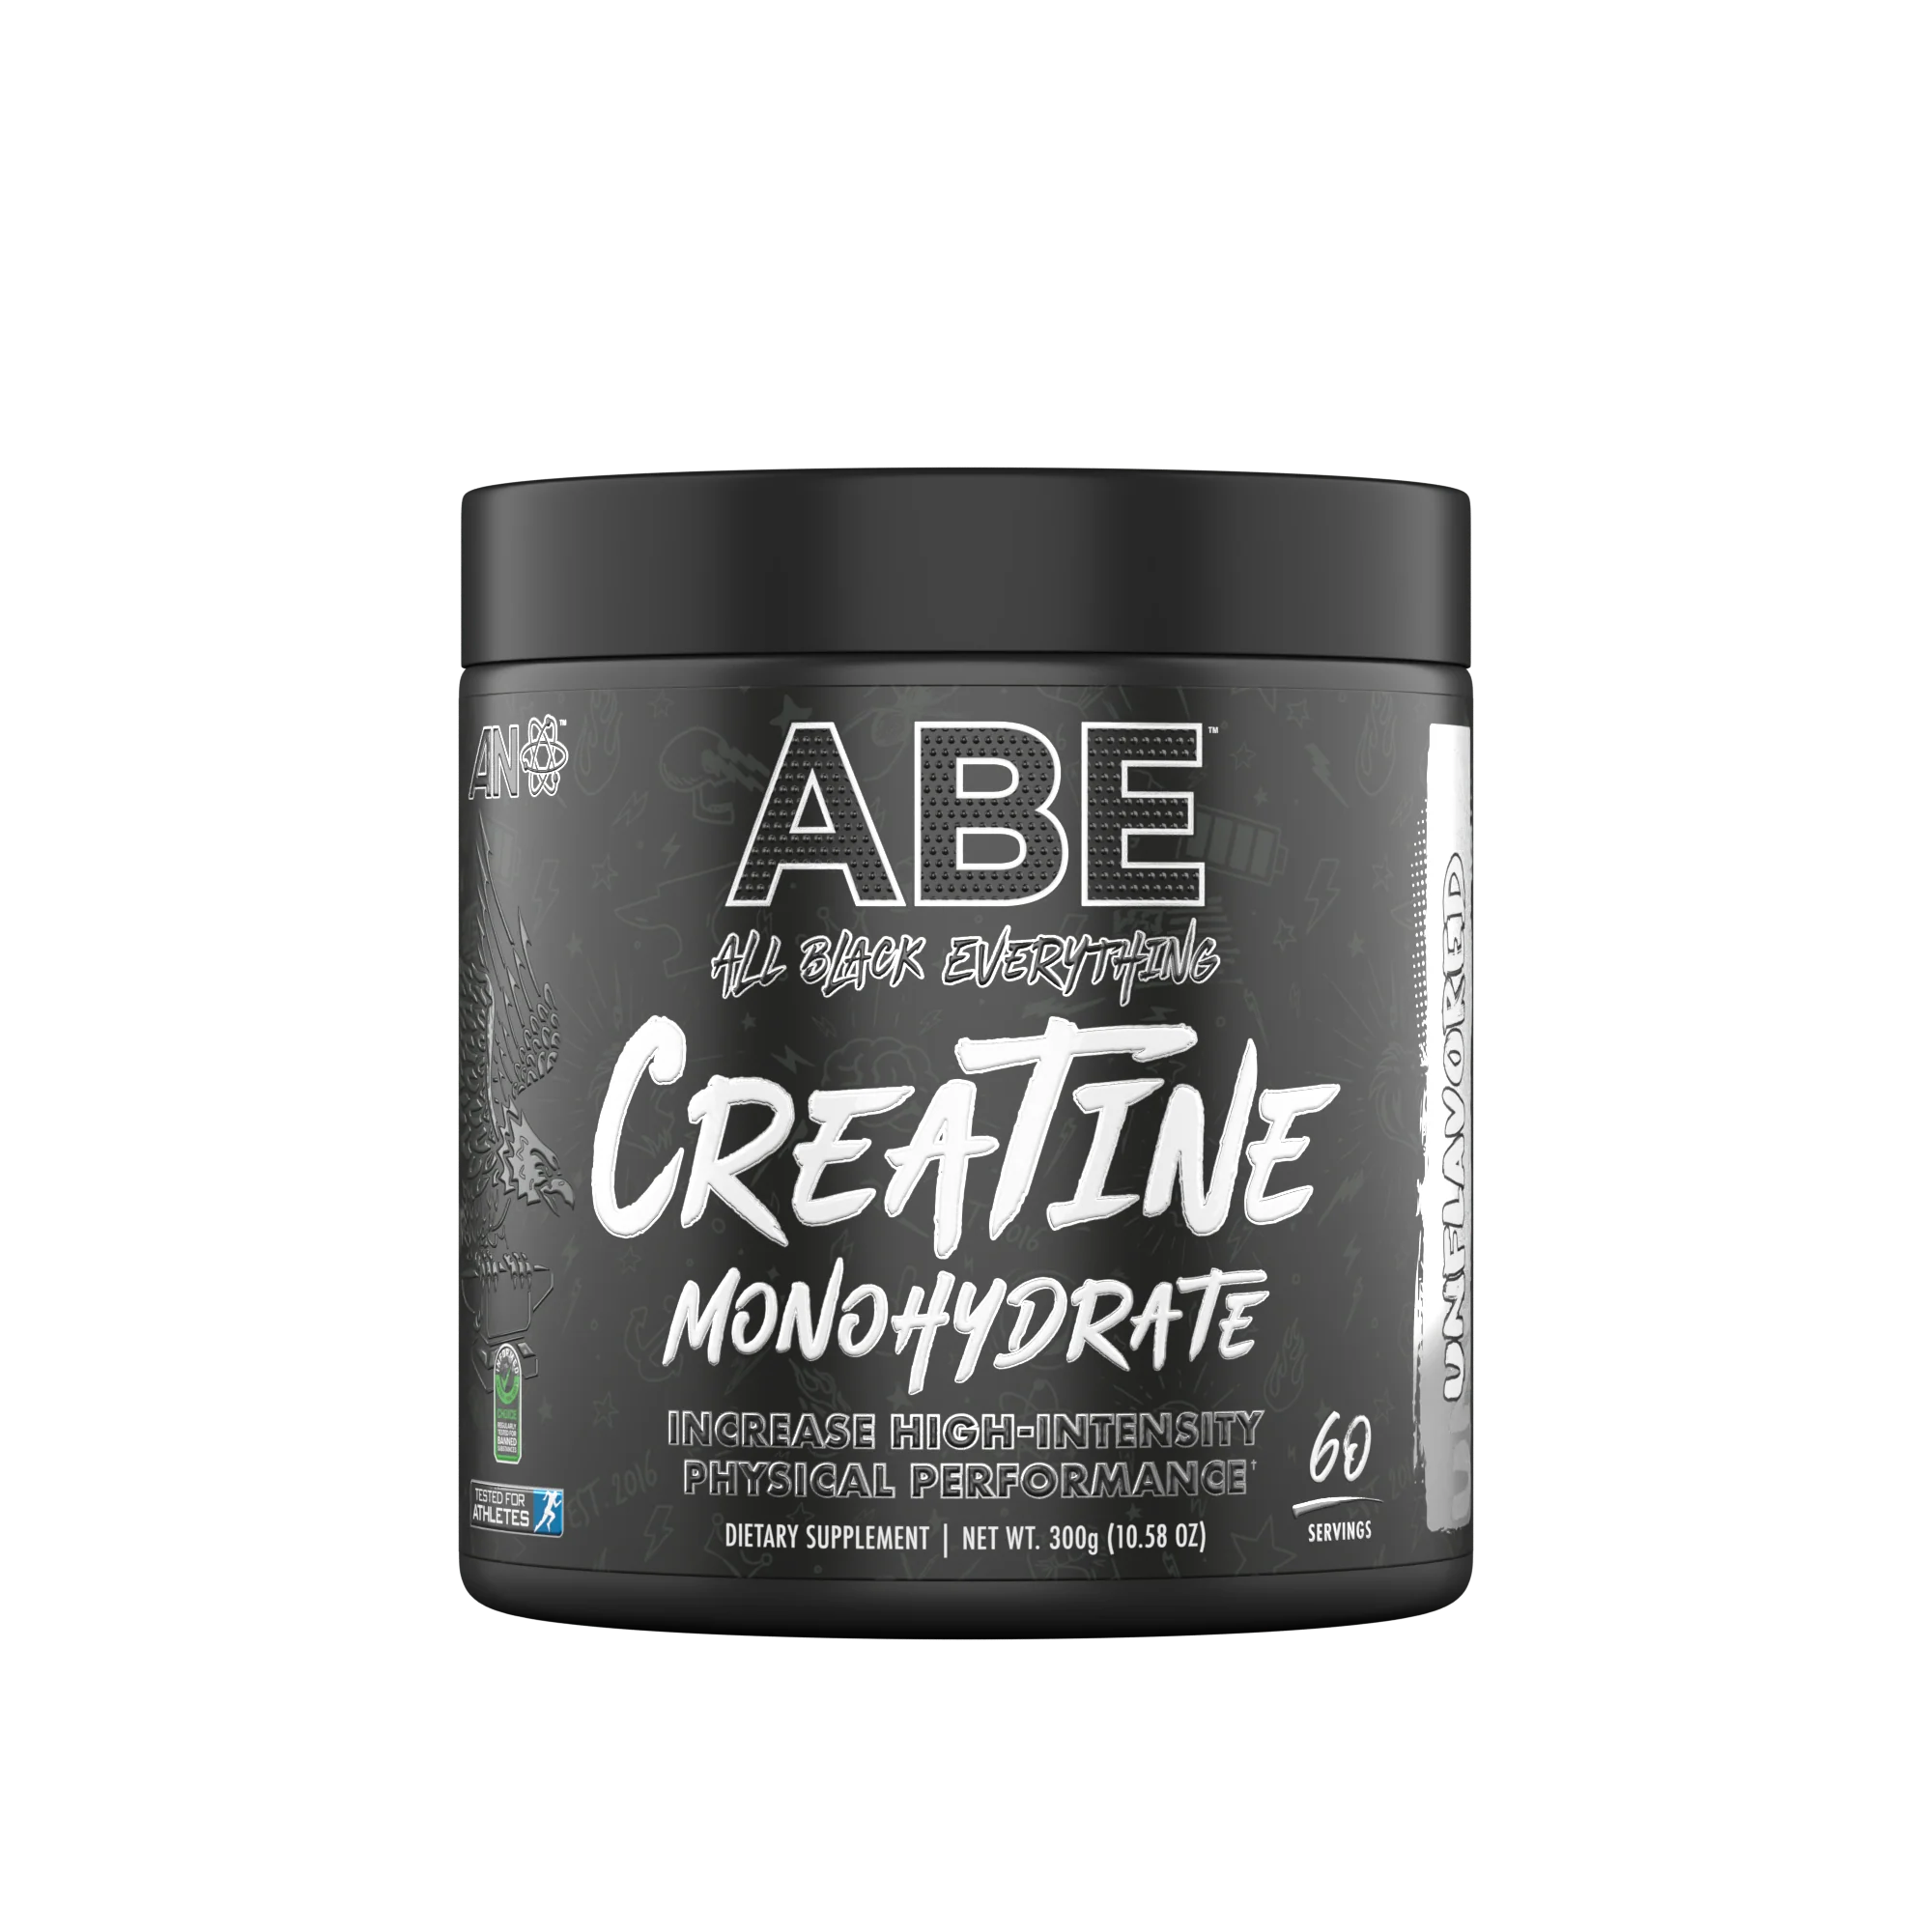 ABE All Black Creatine Monohydrate - Unflavored